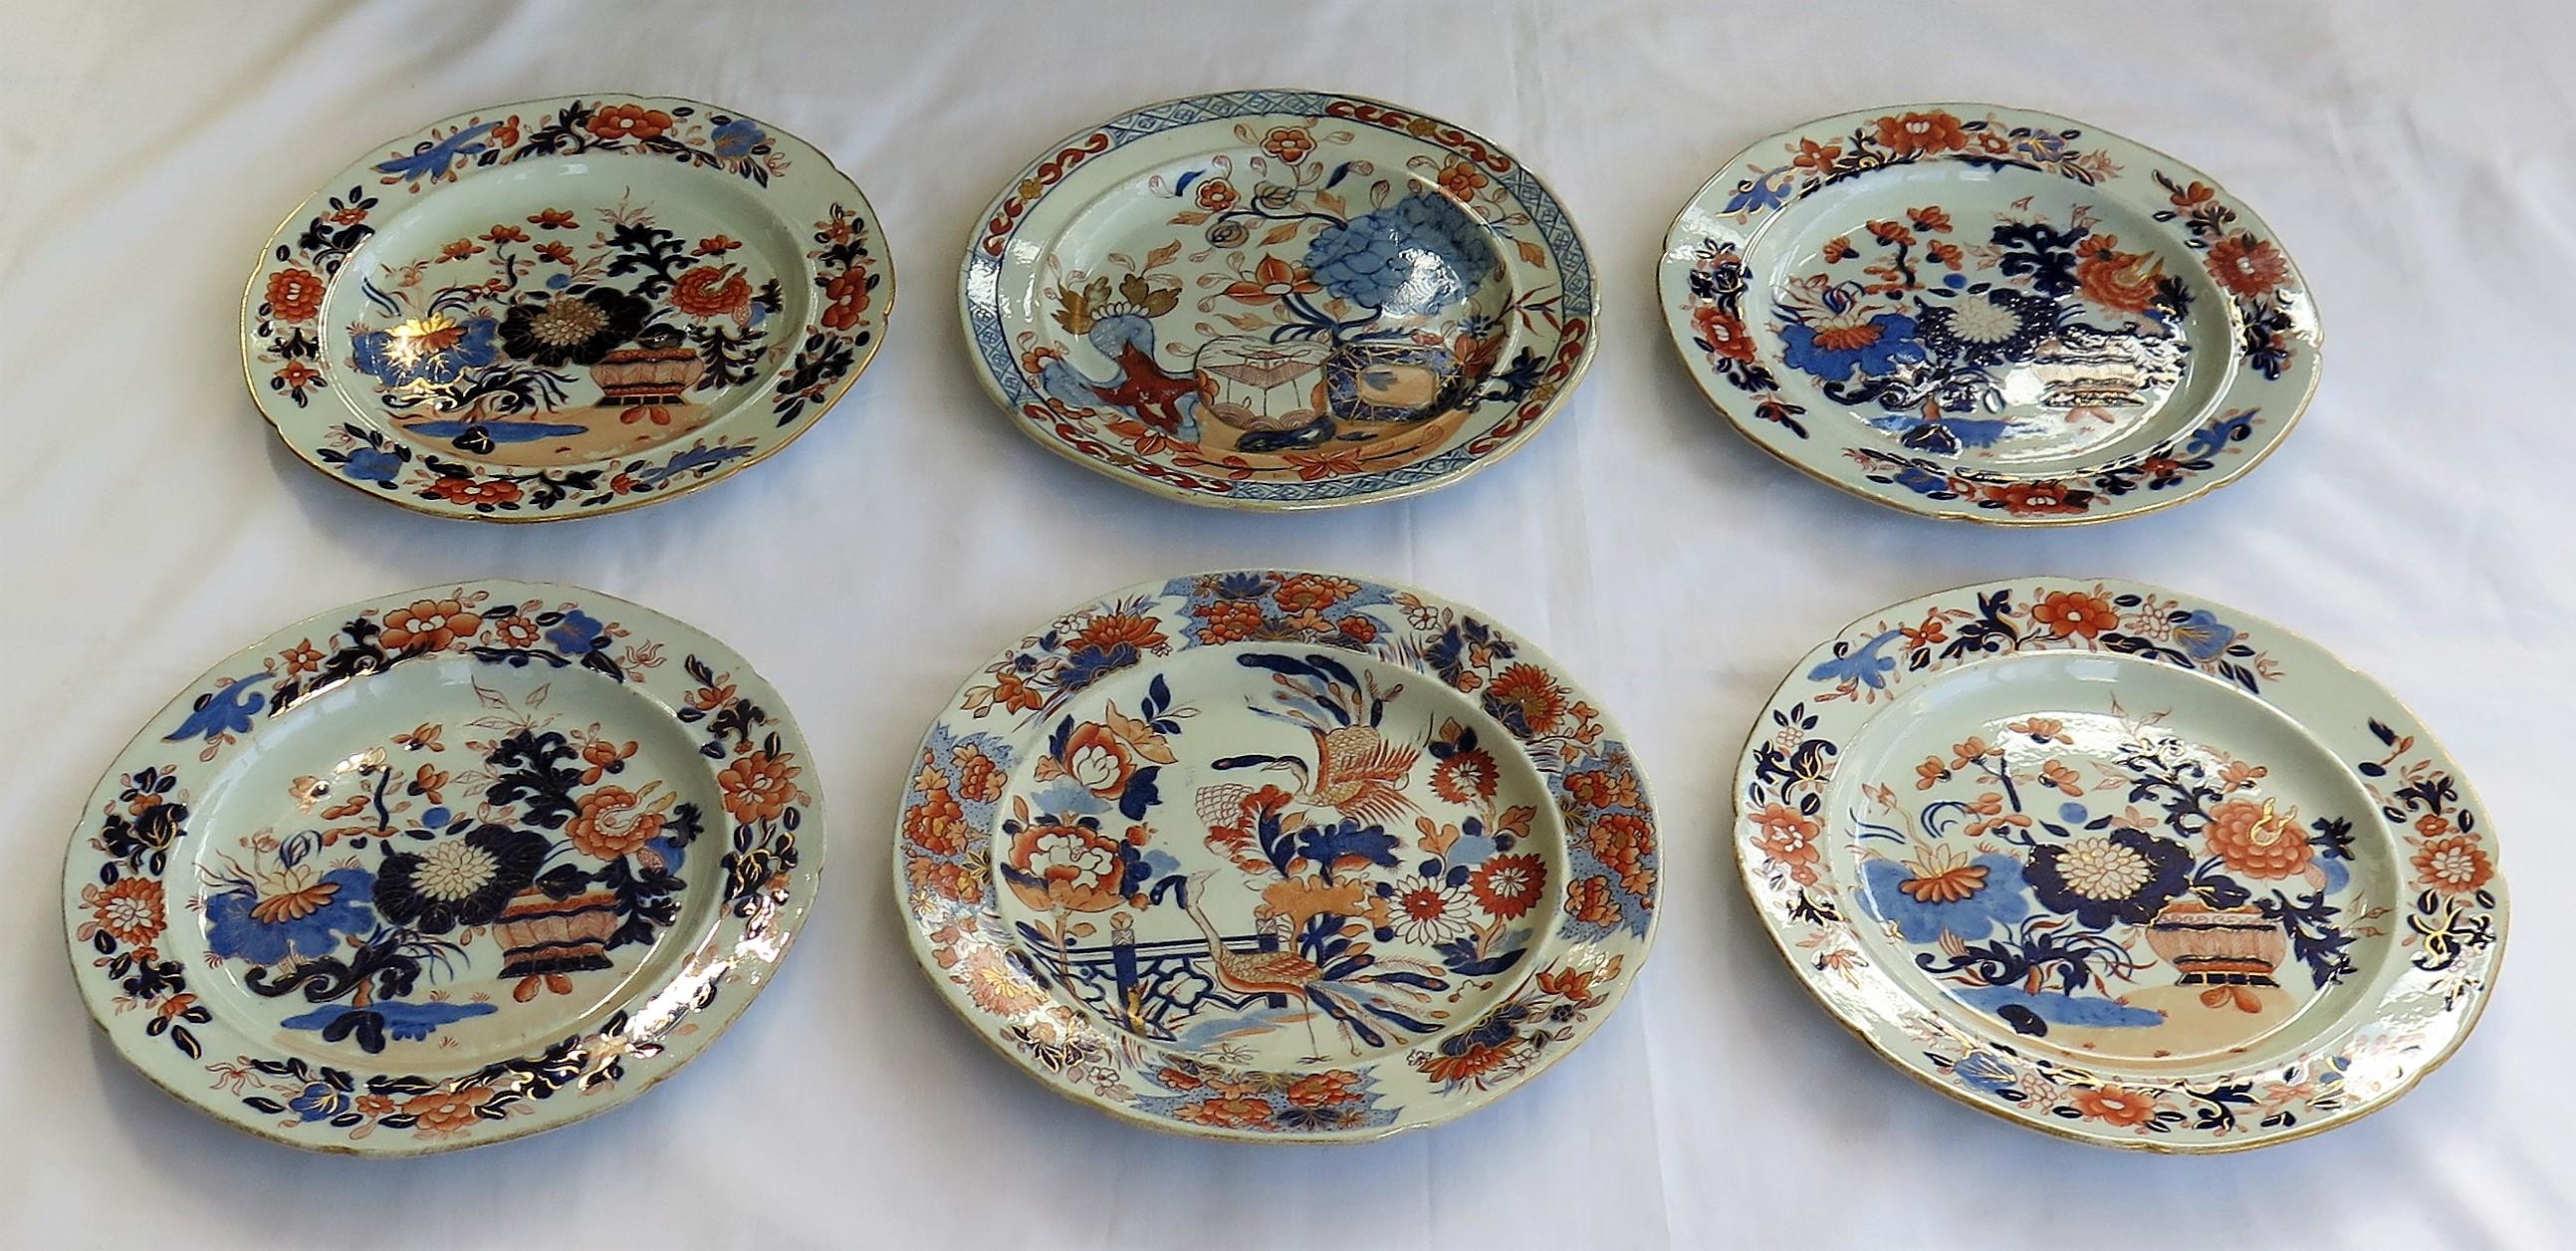 This is a harlequin set of six Mason's Ironstone dinner plates, all dating to the earliest English Georgian period, between 1813 and 1820.

All the dinner plates are circular with a notched rim and of the same nominal size of about 9.5 inches